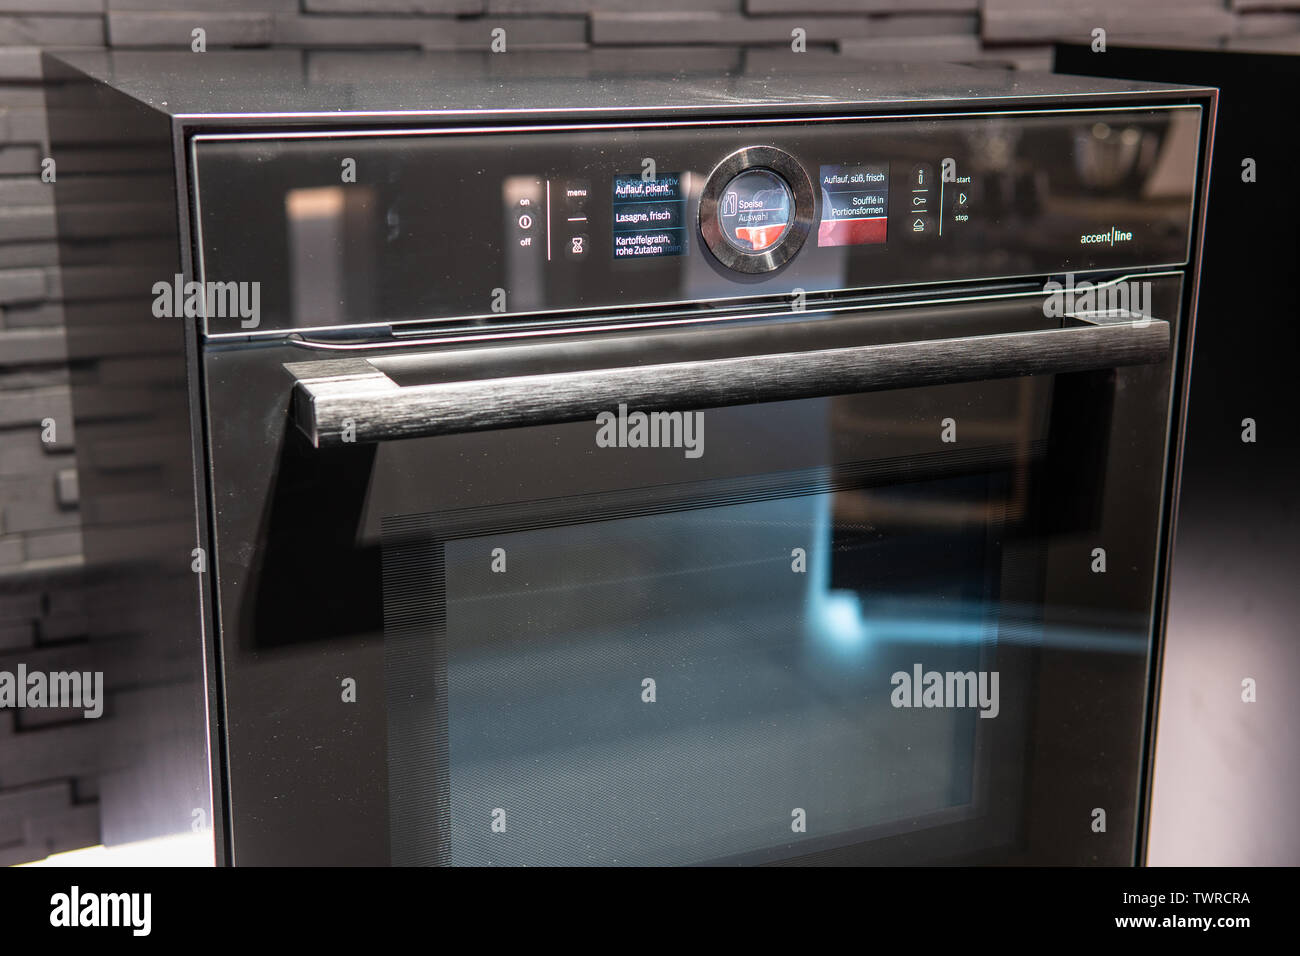 Berlin, Germany, Aug 29, 2018 new Bosch accent line carbon black Hobs,  ovens, microwaves, Robert Bosch exhibition, Global Innovations Show IFA  2018 Stock Photo - Alamy